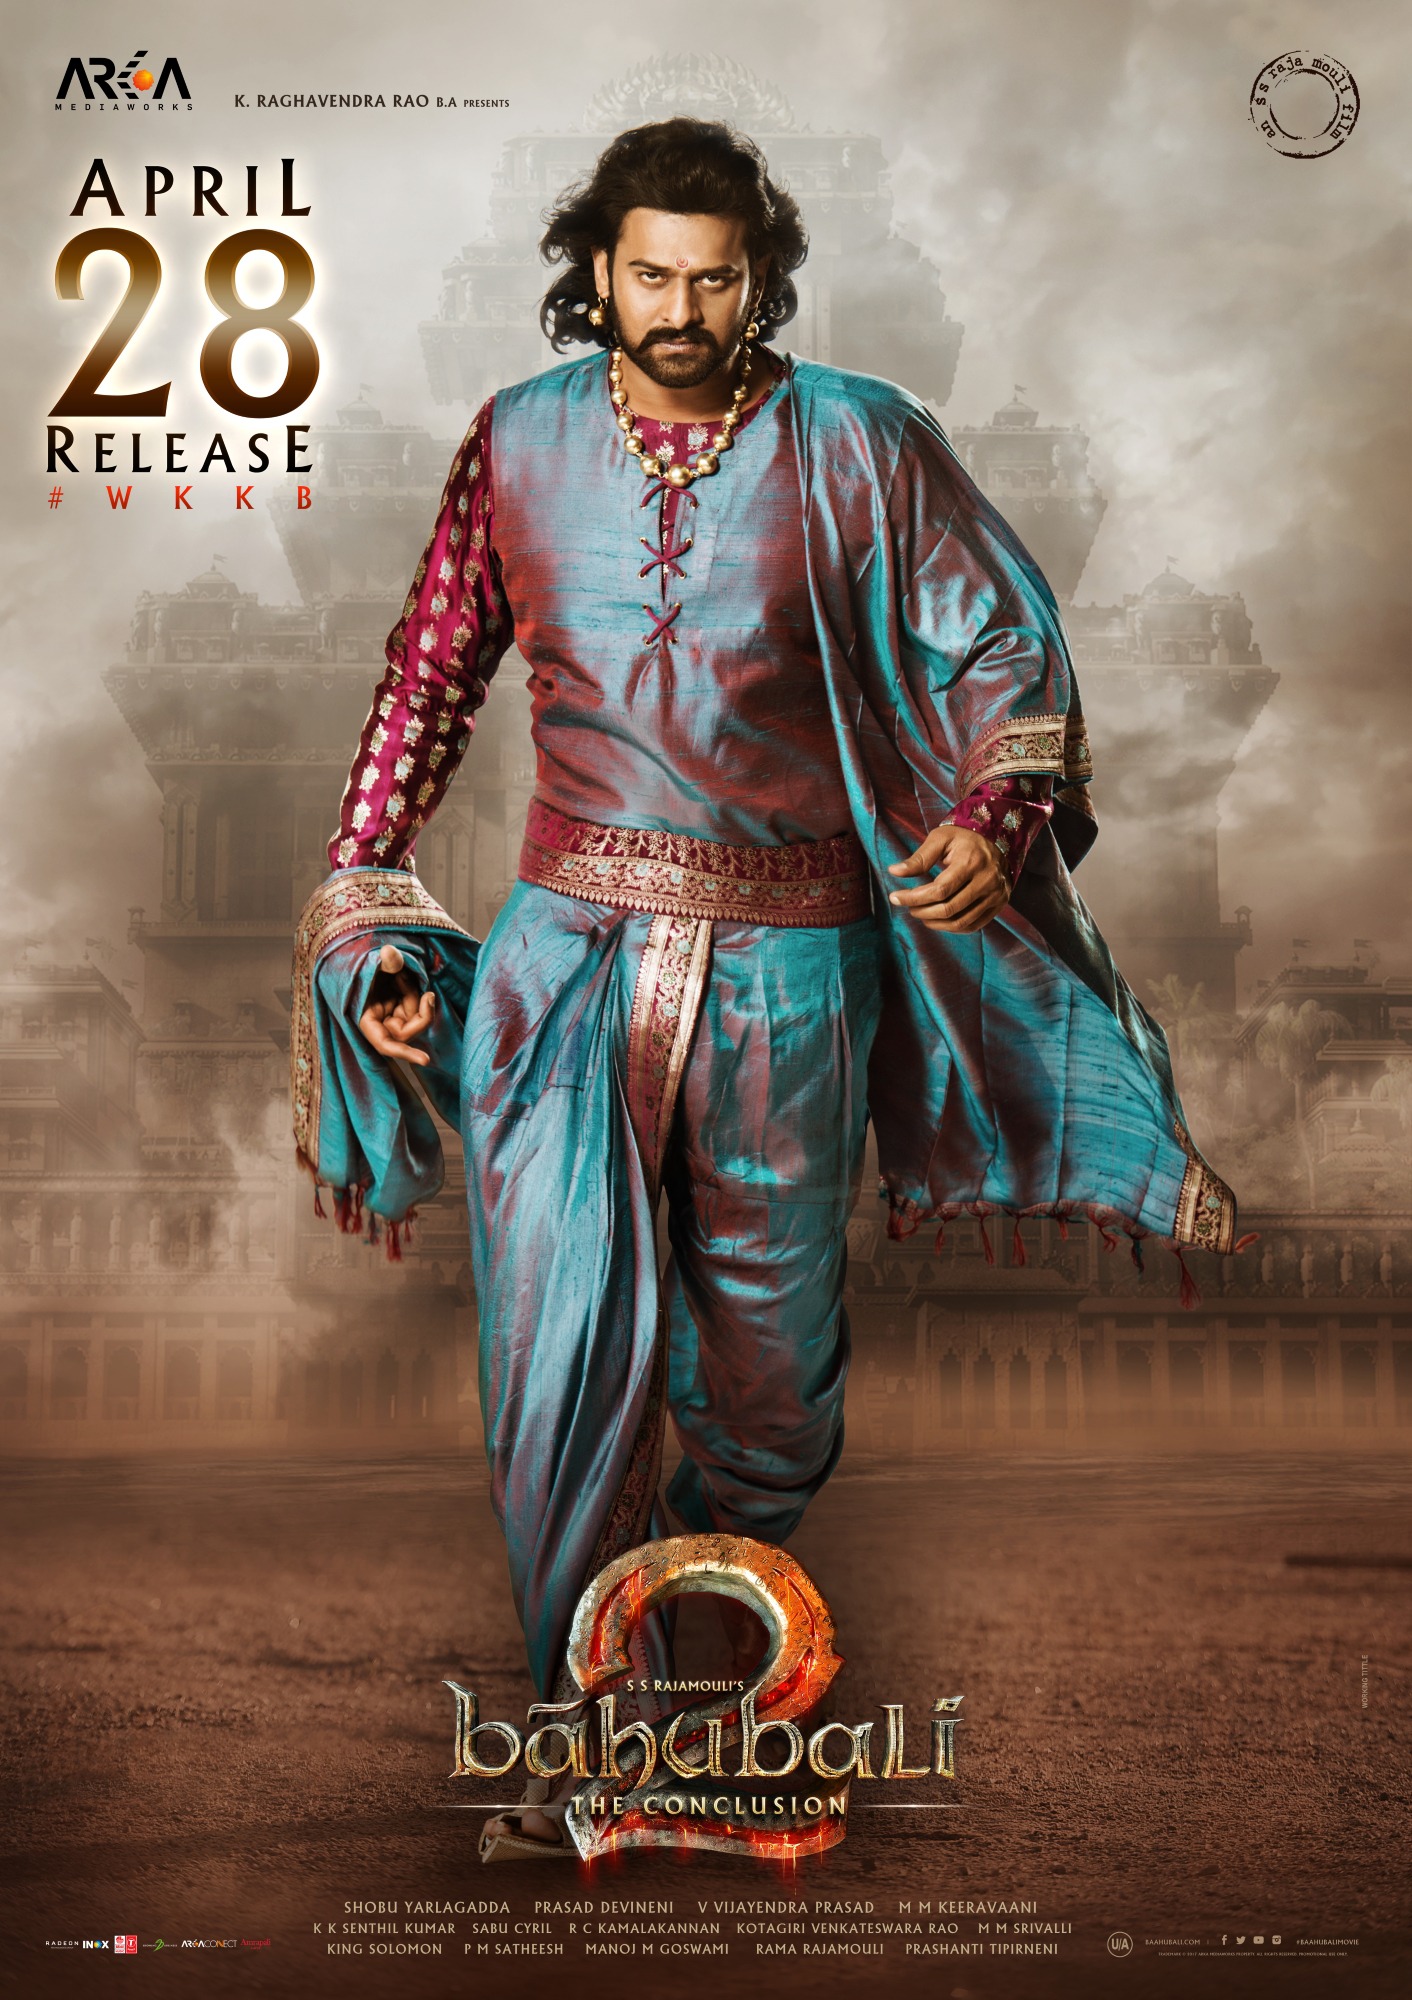 Mega Sized Movie Poster Image for Baahubali 2: The Conclusion (#8 of 12)